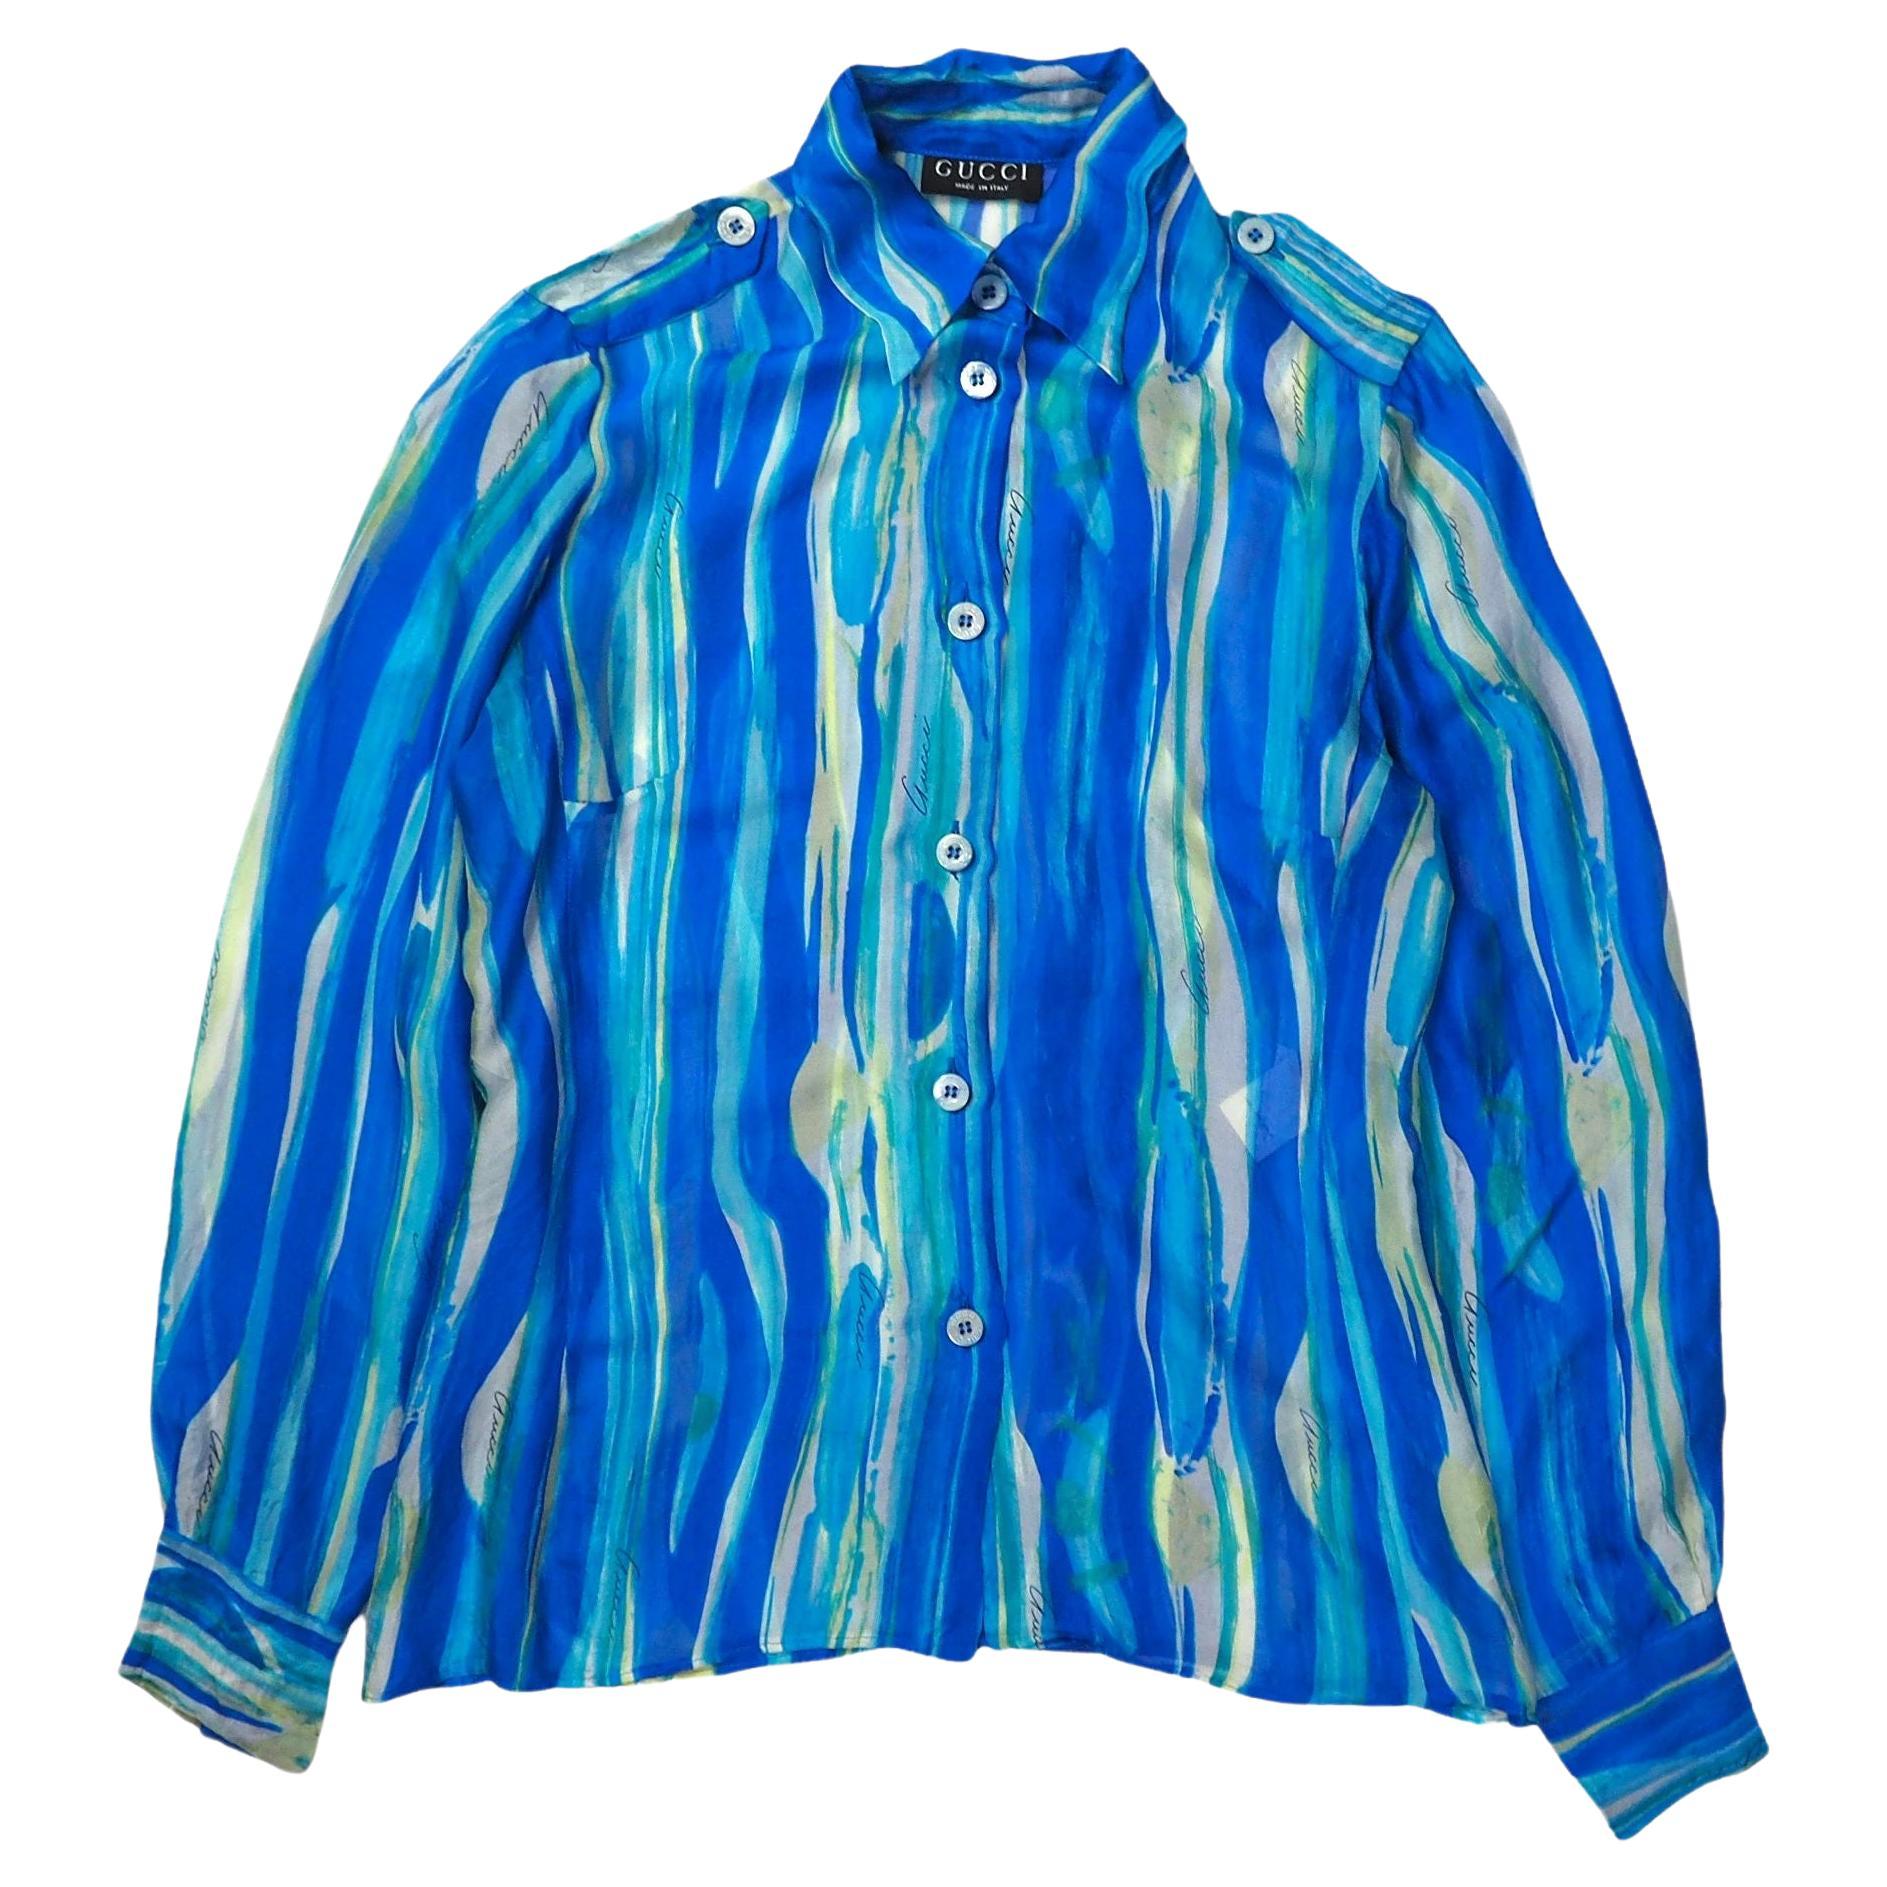 GUCCI S/S 1996 by Tom Ford Abstract Colour Printed Silk Sheer Shirt For Sale